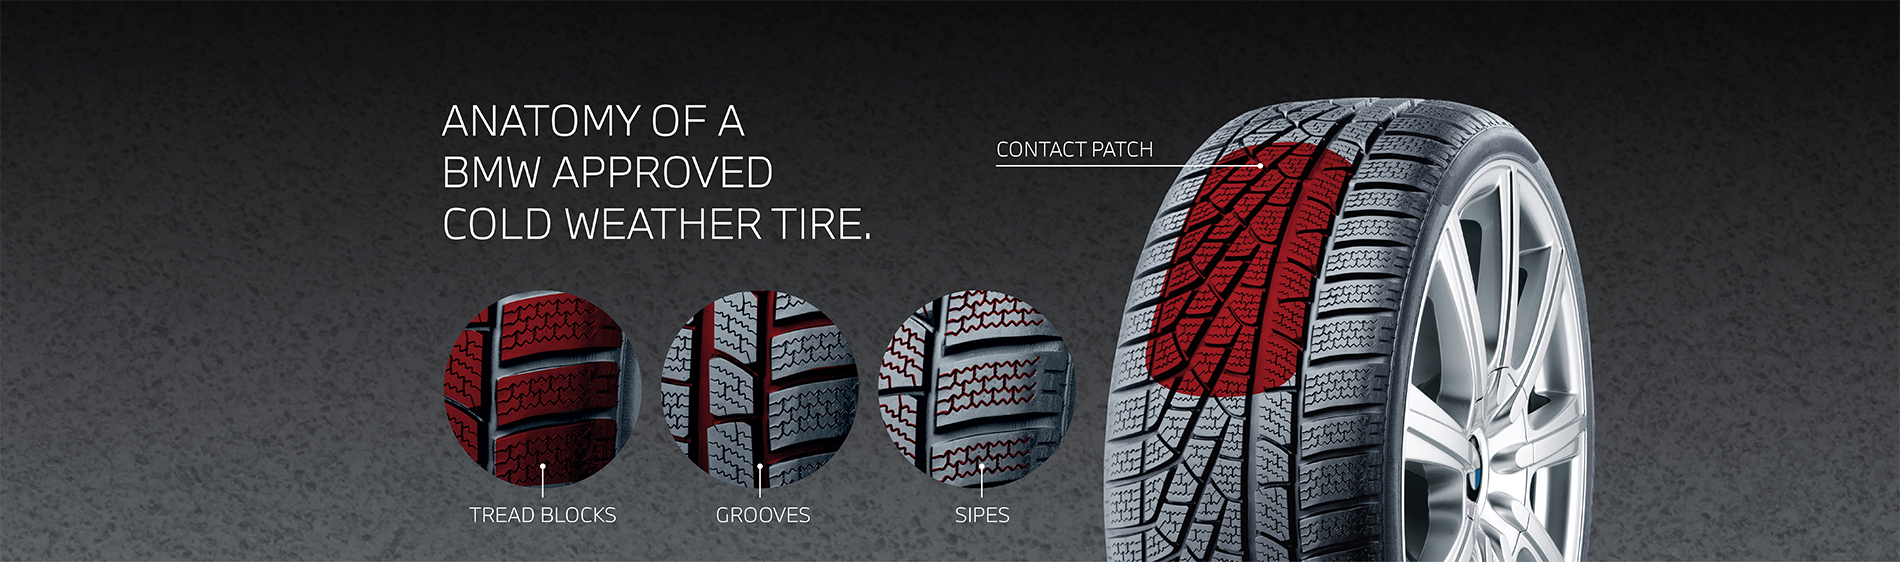 Four close-ups of BMW Approved Cold Weather Tires illustrating (from left to right): tread blocks, grooves, sipes and a contact patch.